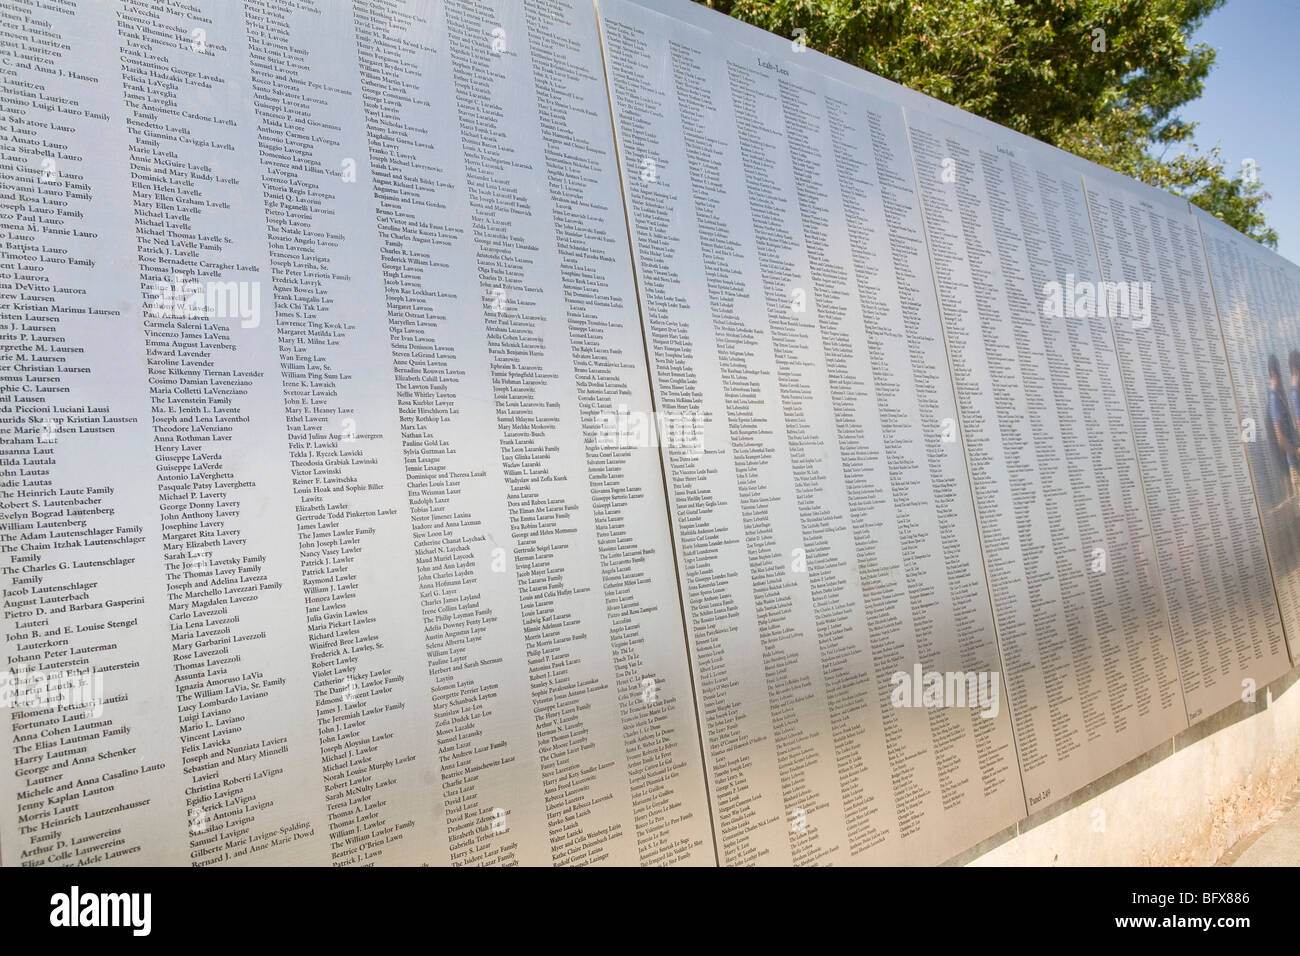 The names of immigrants that passed through Ellis Island etched in a metal wall, New York City Stock Photo